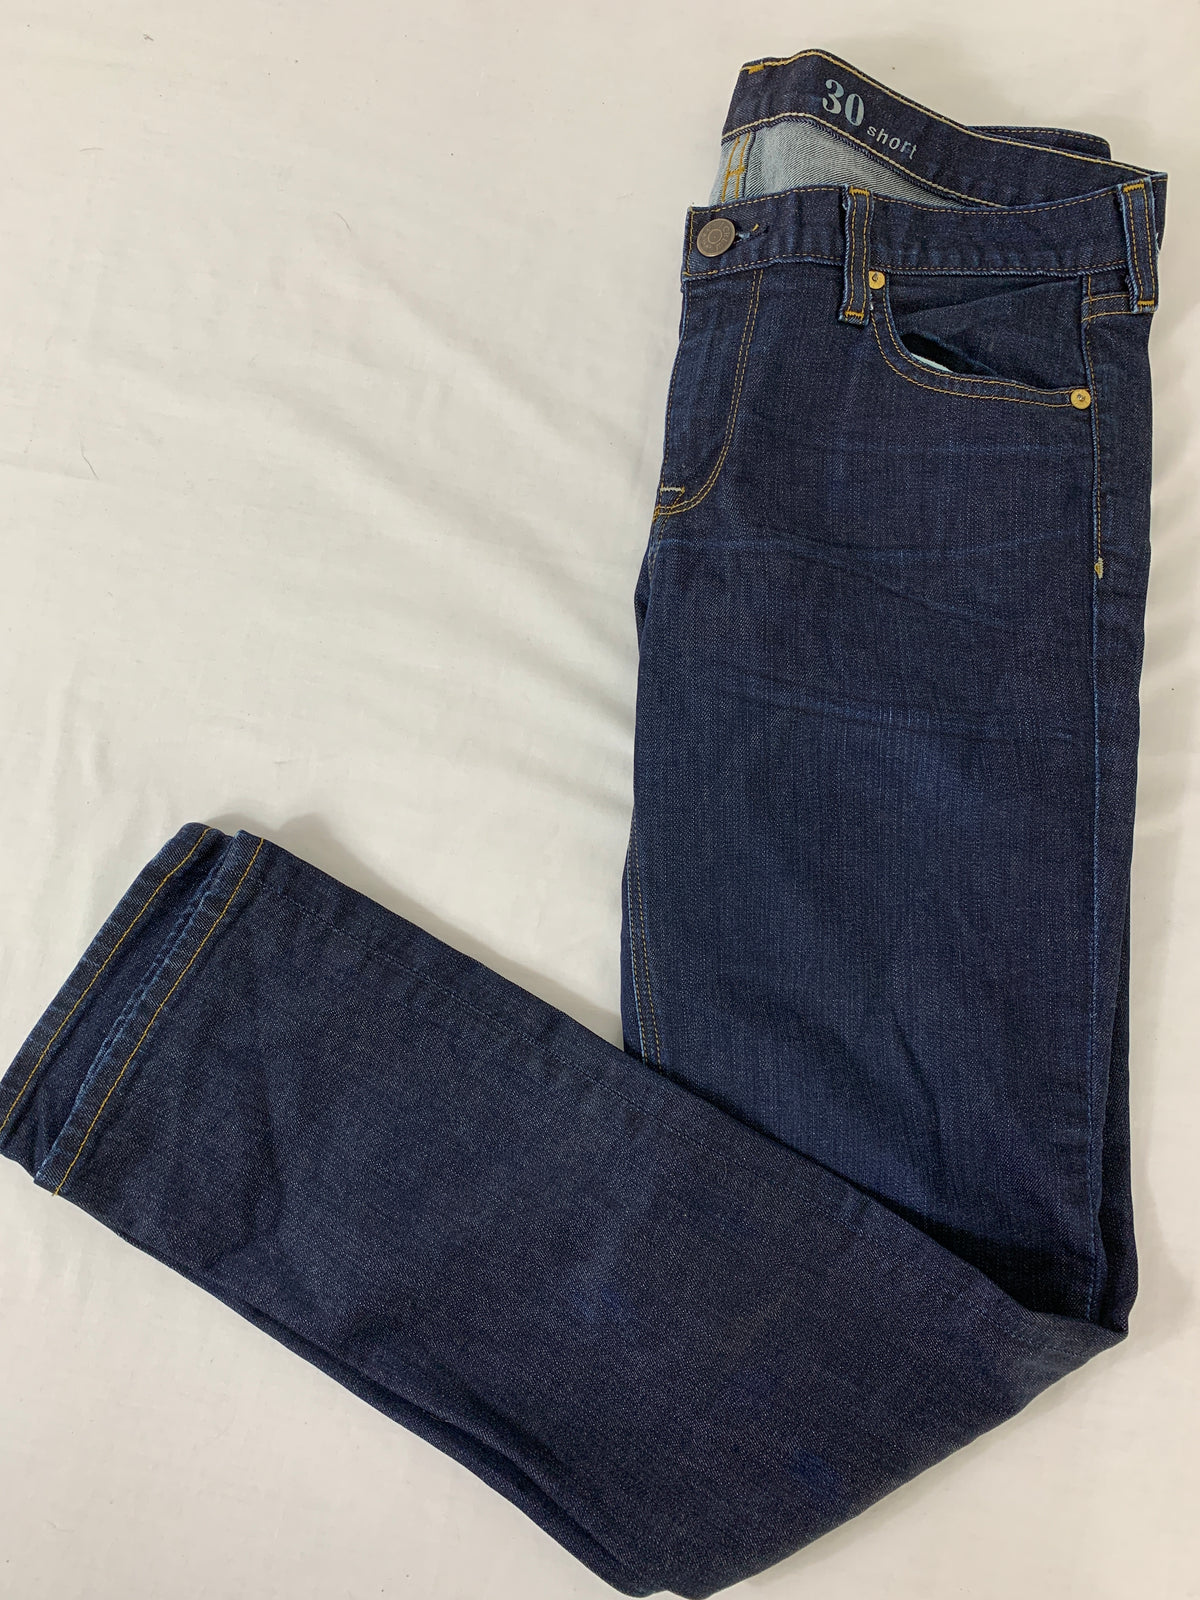 J Crew Matchstick Jeans Size 30 — Family Tree Resale 1